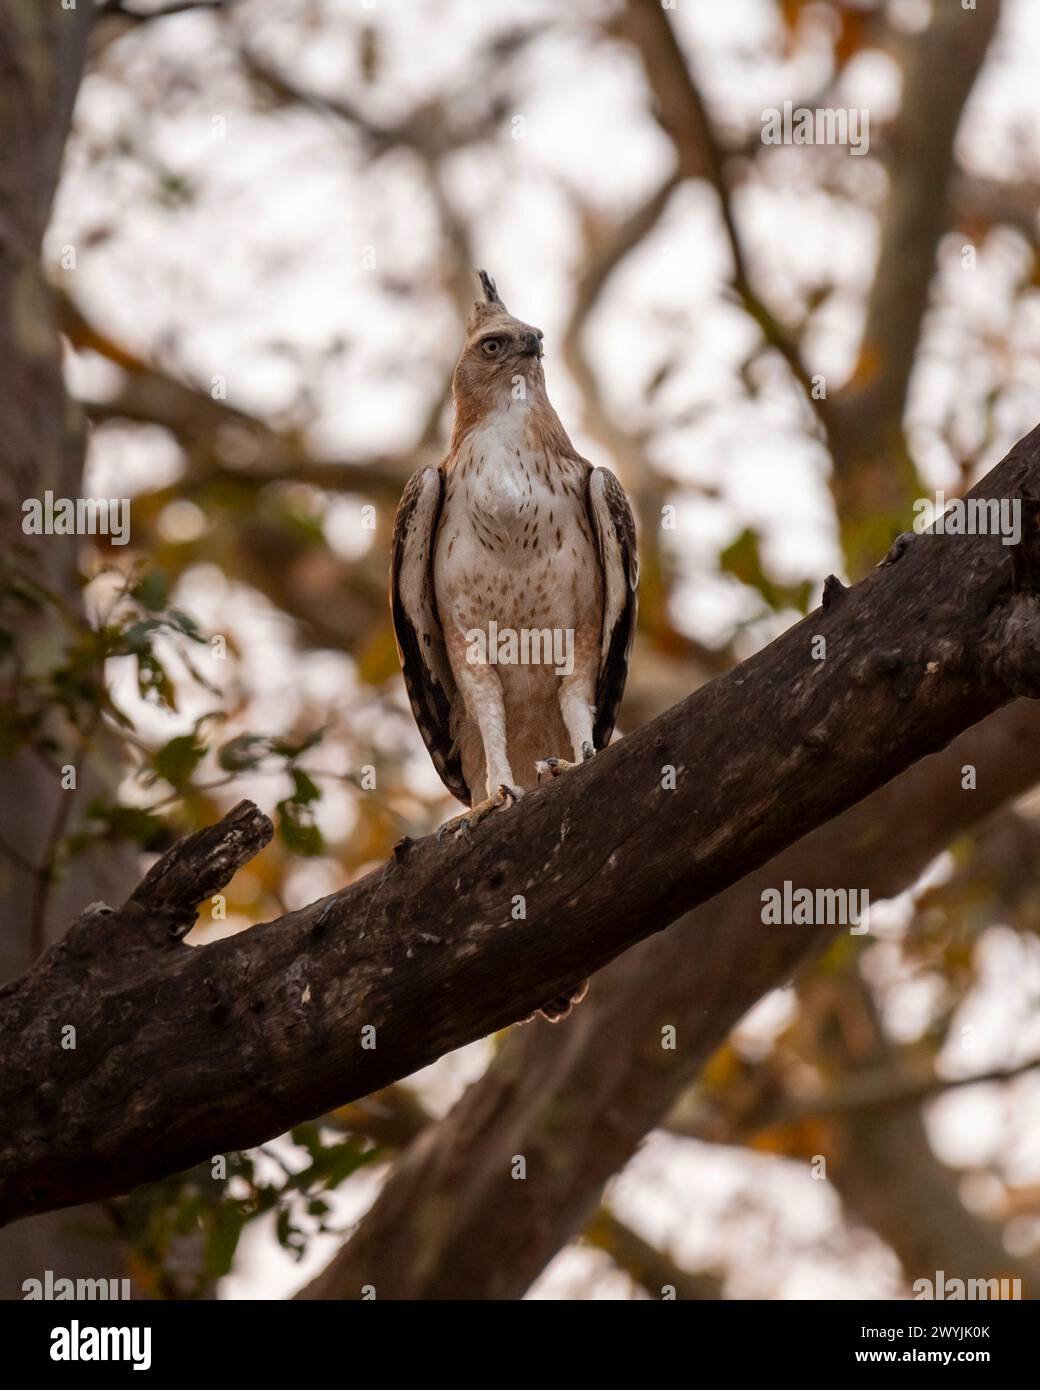 changeable or crested hawk eagle or nisaetus cirrhatus closeup front profile feather details perched on tree in natural green background  panna india Stock Photo